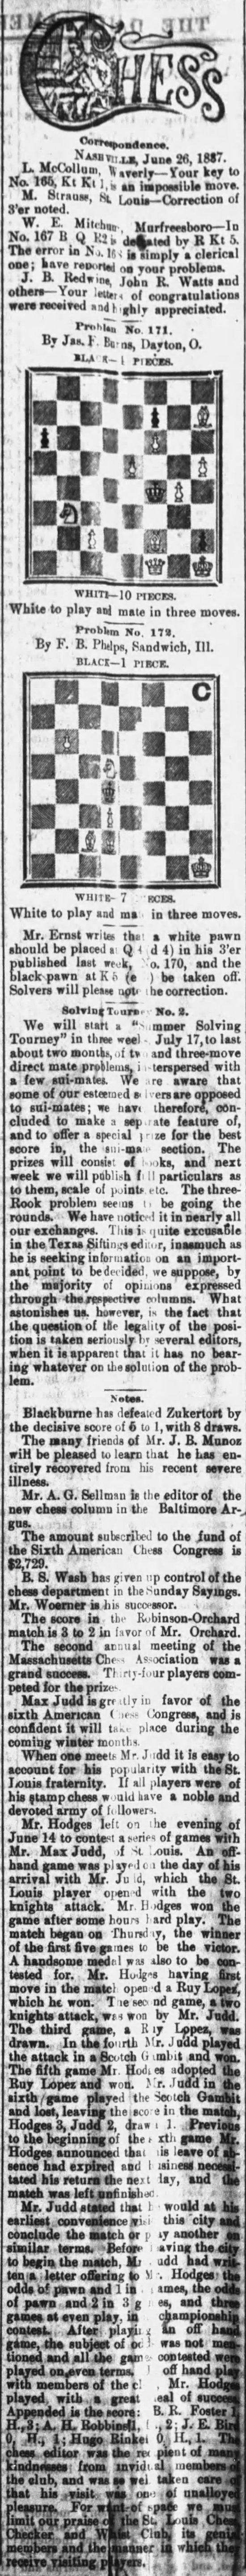 1887.06.26-01 Nashville Daily American.png